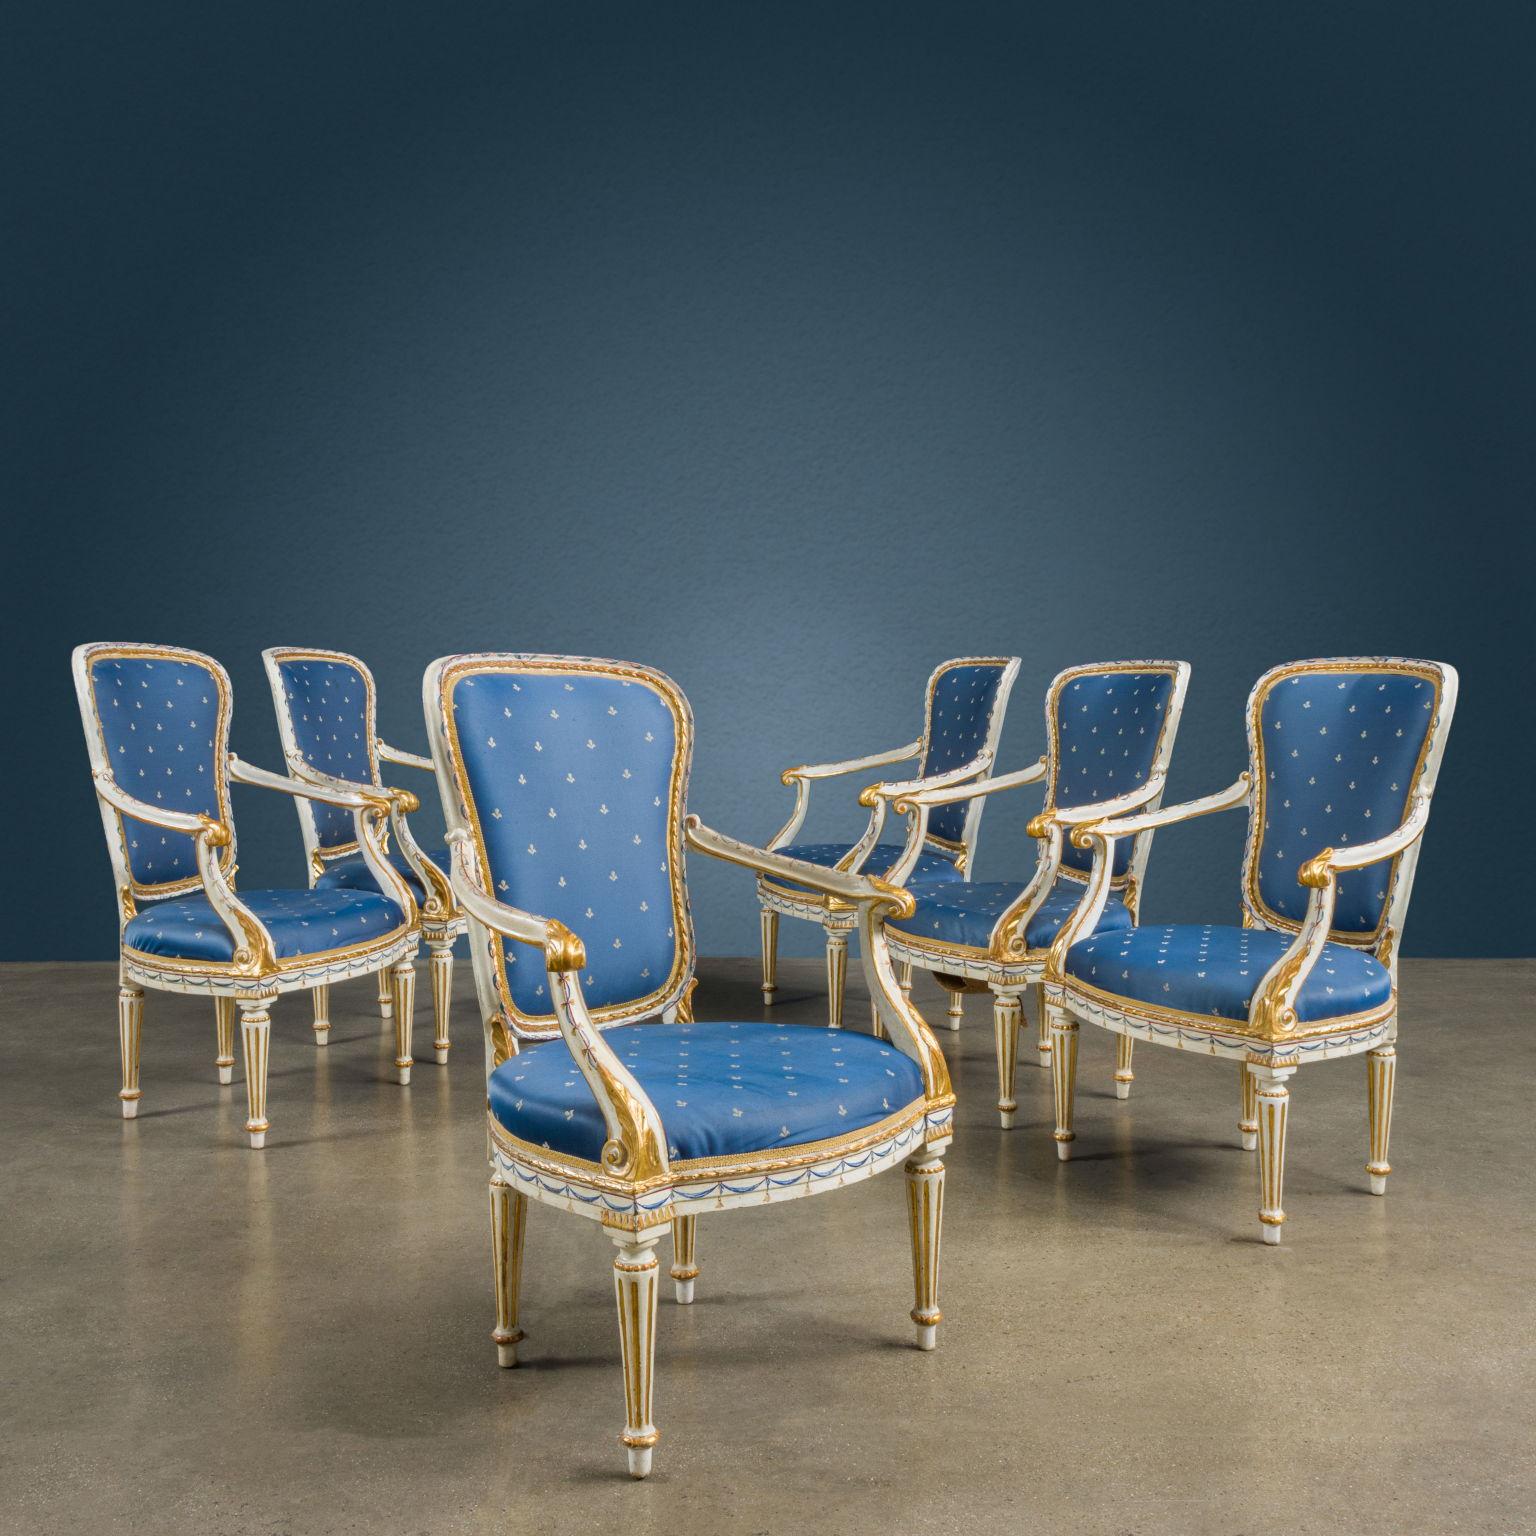 Group of six ivory lacquered, painted and gilded walnut armchairs. Shaped back; the wavy armrests are carved with an acanthus leaf, both on the socket and in the underarm, the latter is developed in a twisting motion and, laterally, the leaf ends in